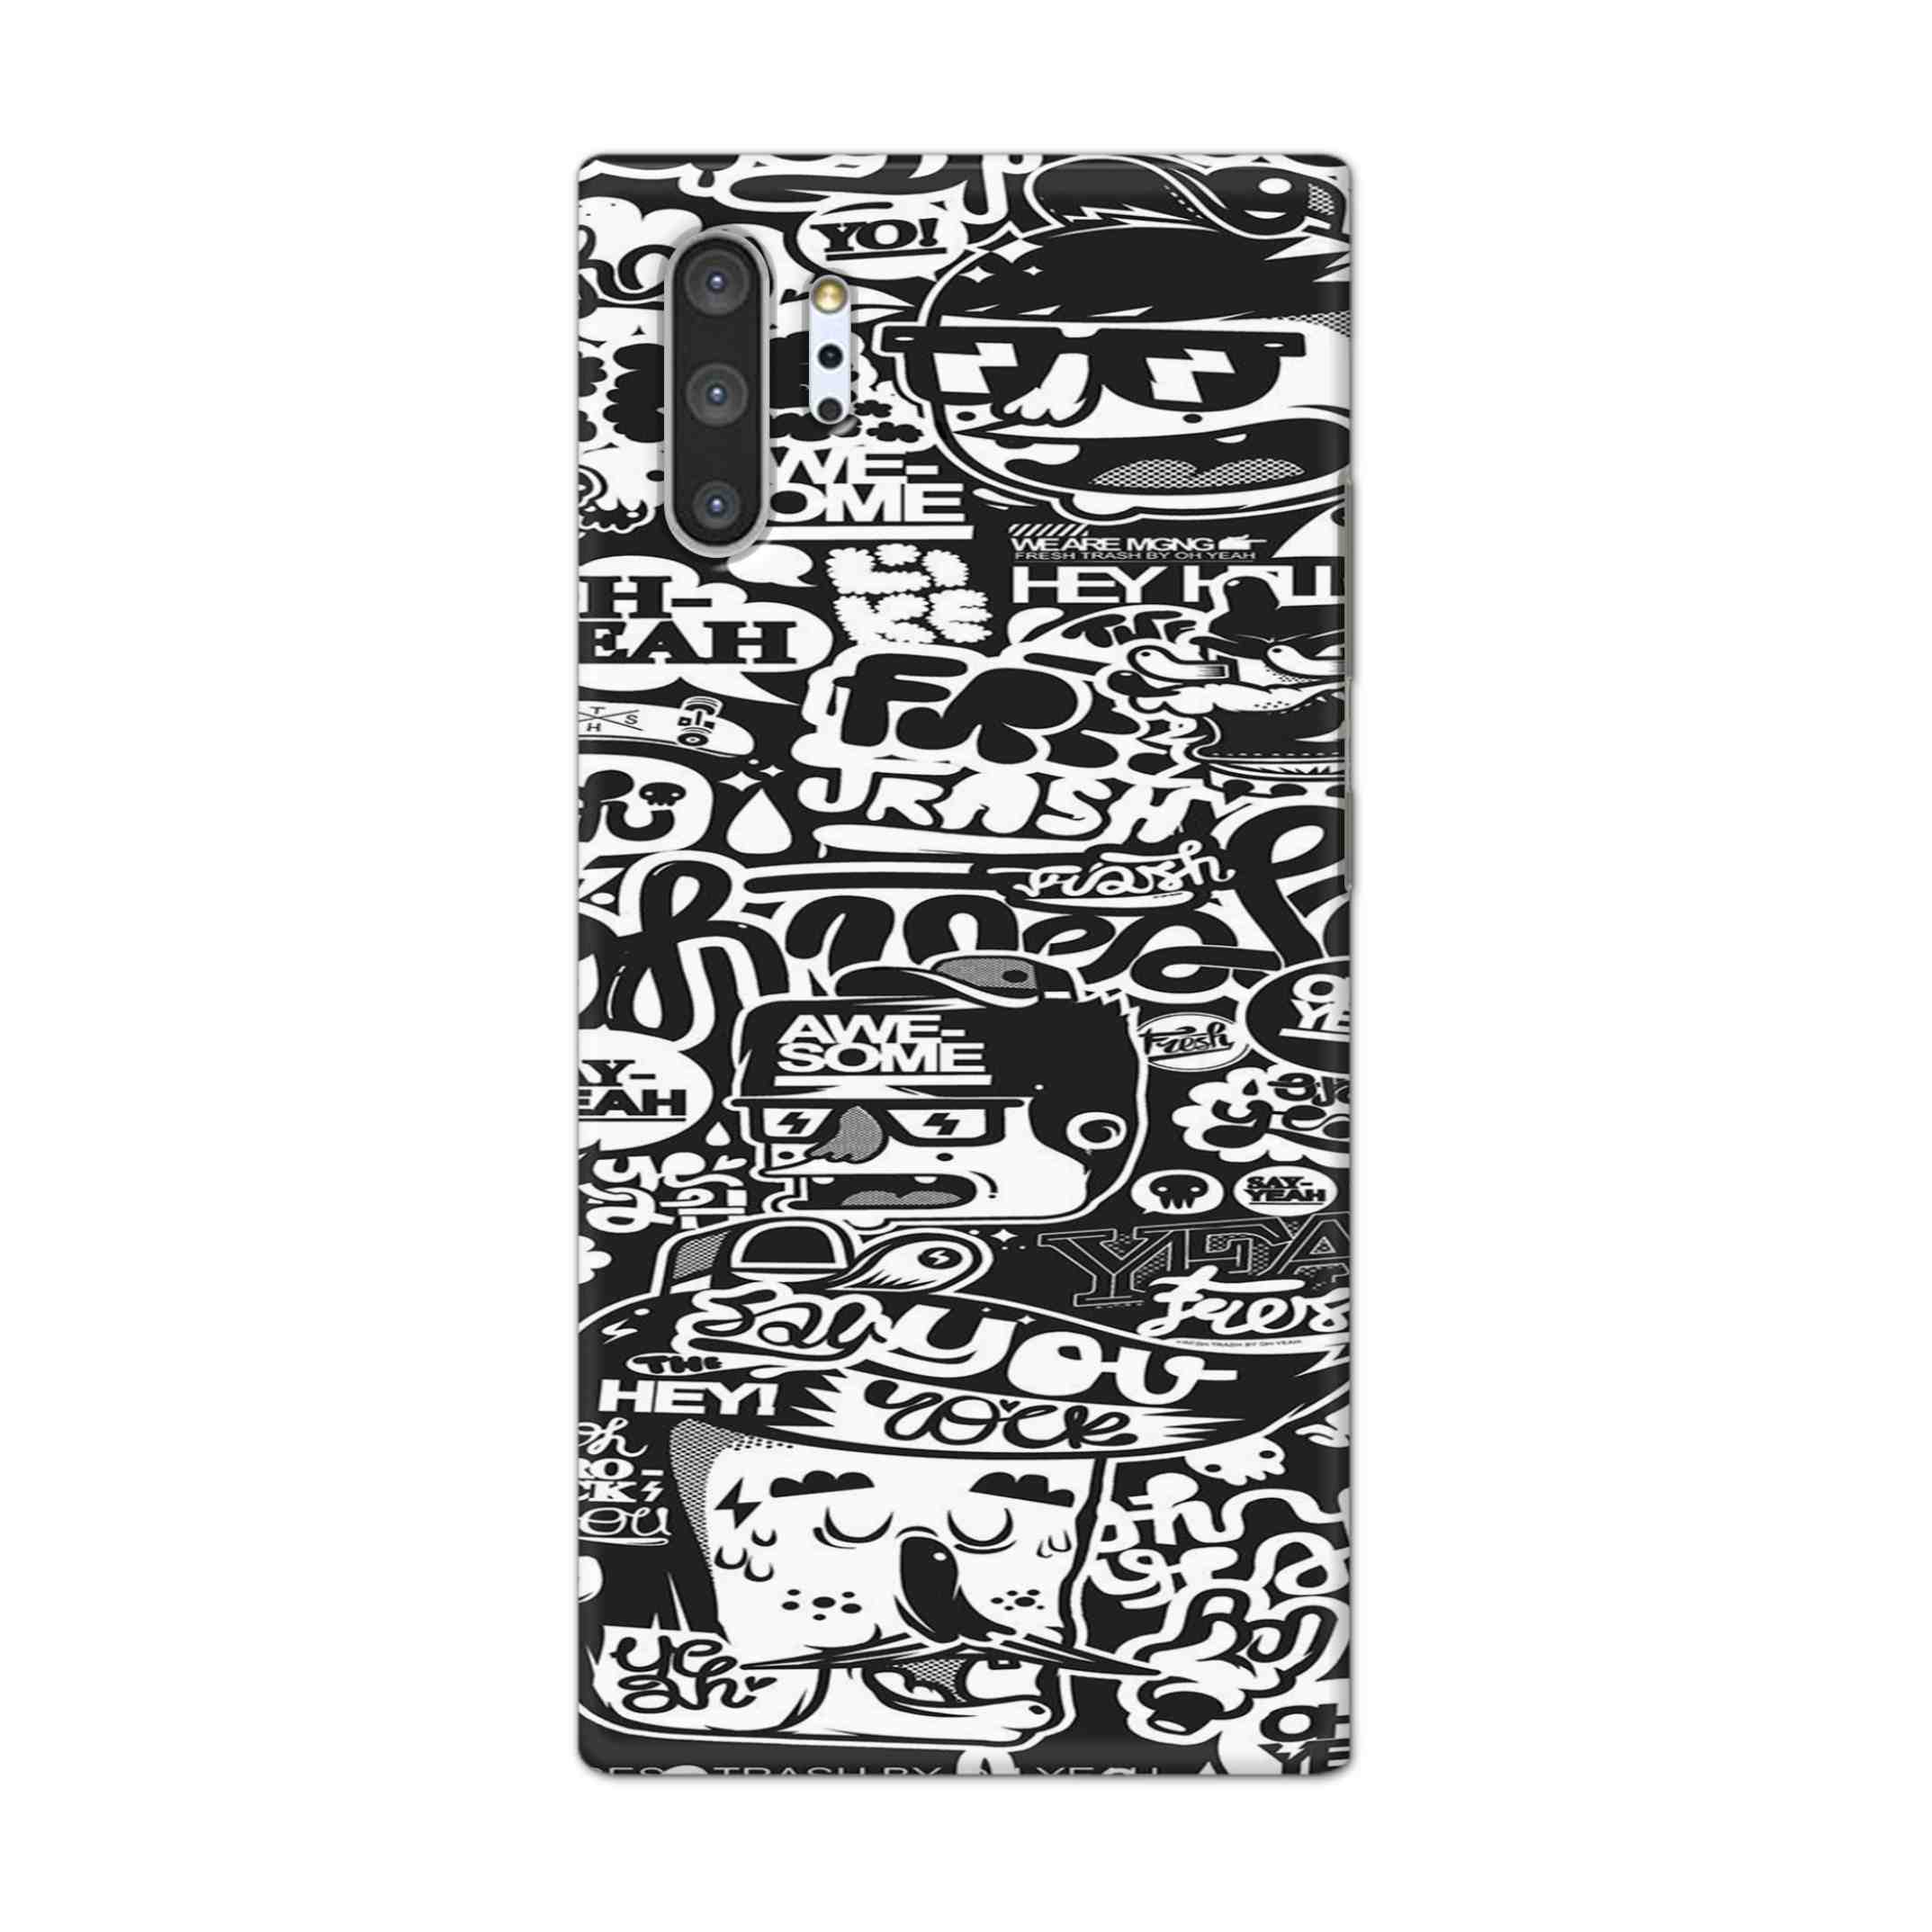 Buy Awesome Hard Back Mobile Phone Case Cover For Samsung Galaxy Note 10 Pro Online